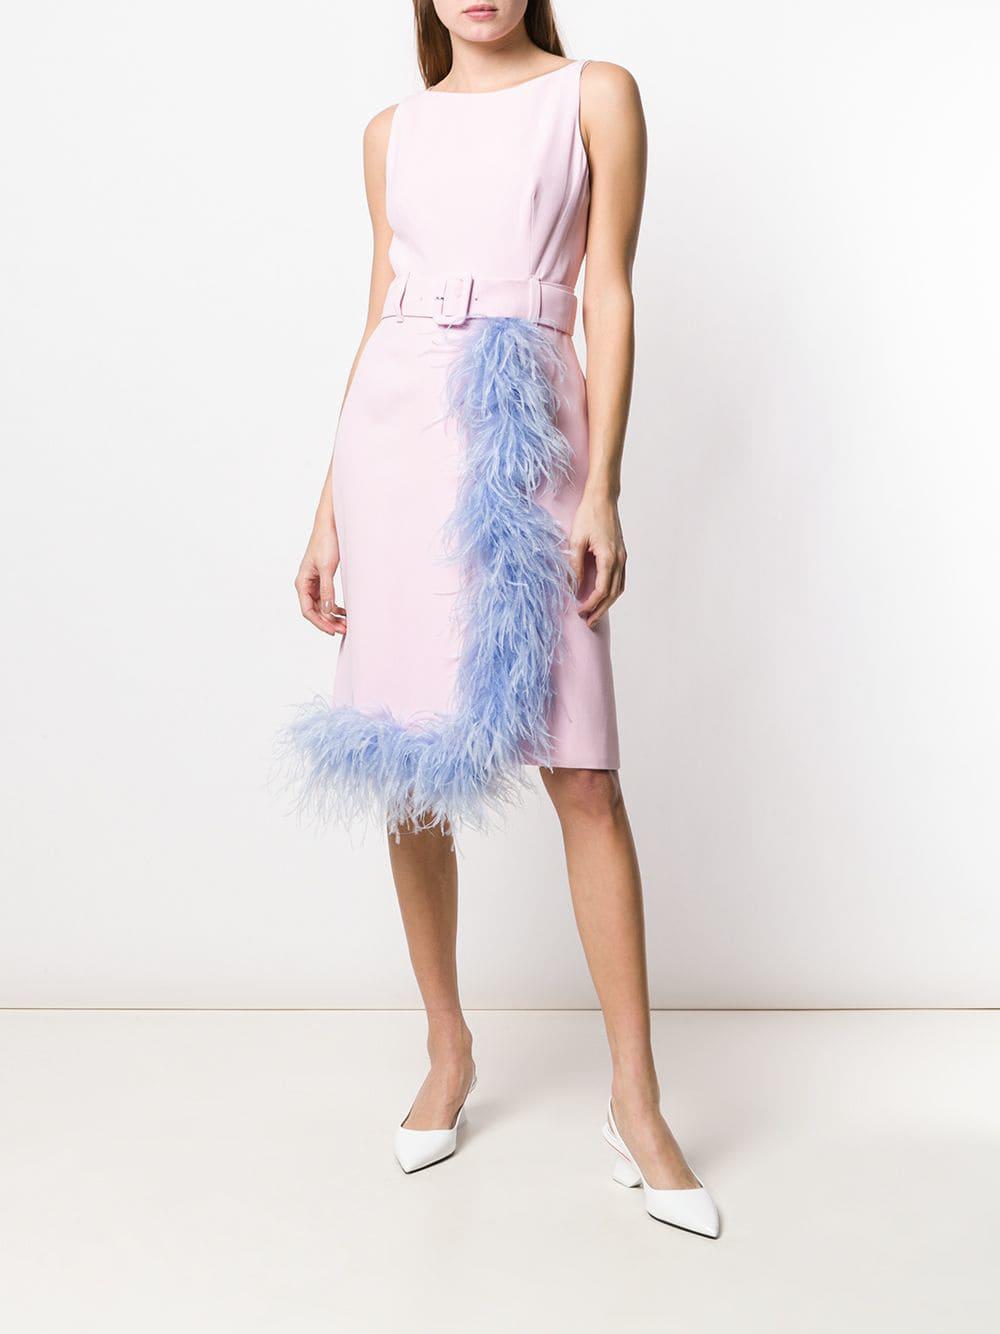 Prada Feather Trimmed Dress in Pink | Lyst